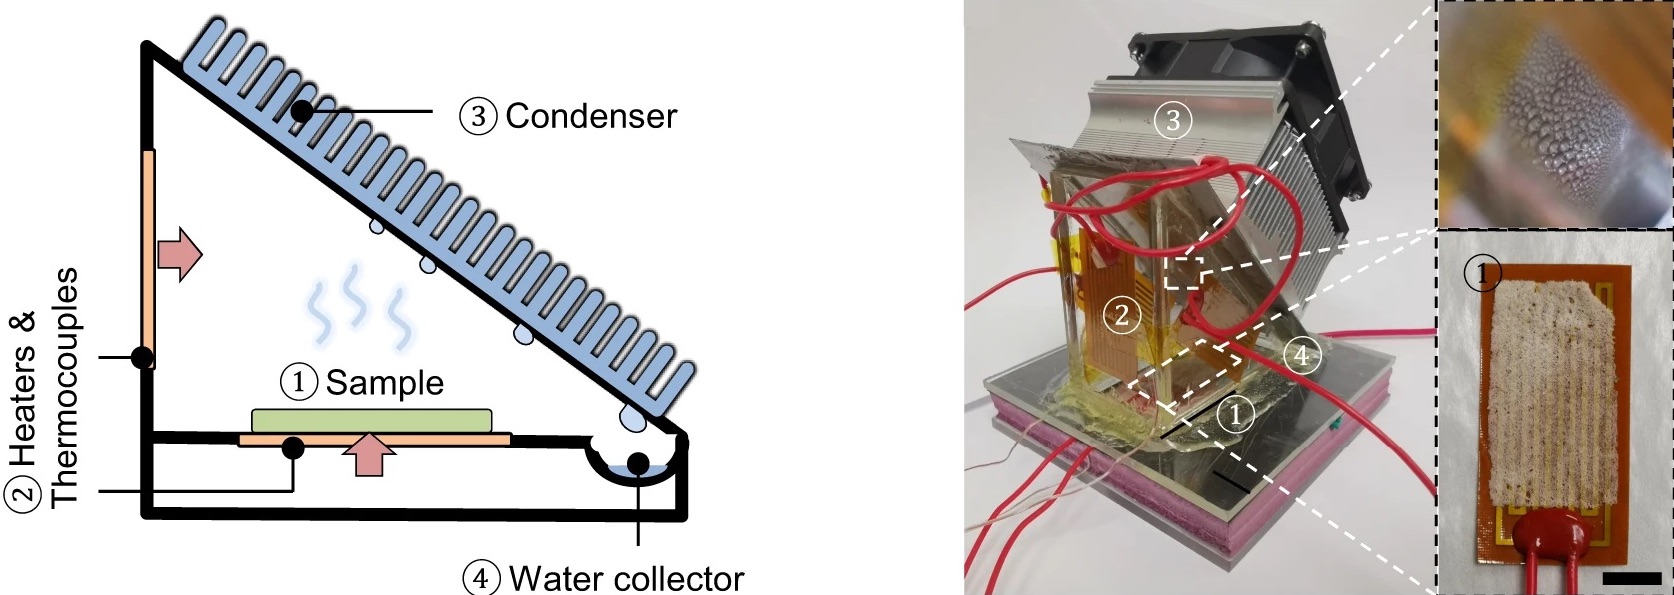 on the left, and illustrated side-view diagram of the device which has a triangular shape of a flat bottom and side, with a metal unit with short tubes sticking out of it at a 45 degree angle. its labels read: "1) sample, 2) heaters & thermocouples, 3) condenser, 4) water collector. on the right is a photograph of the unit with matching numbers for the labels denoting certain compenents